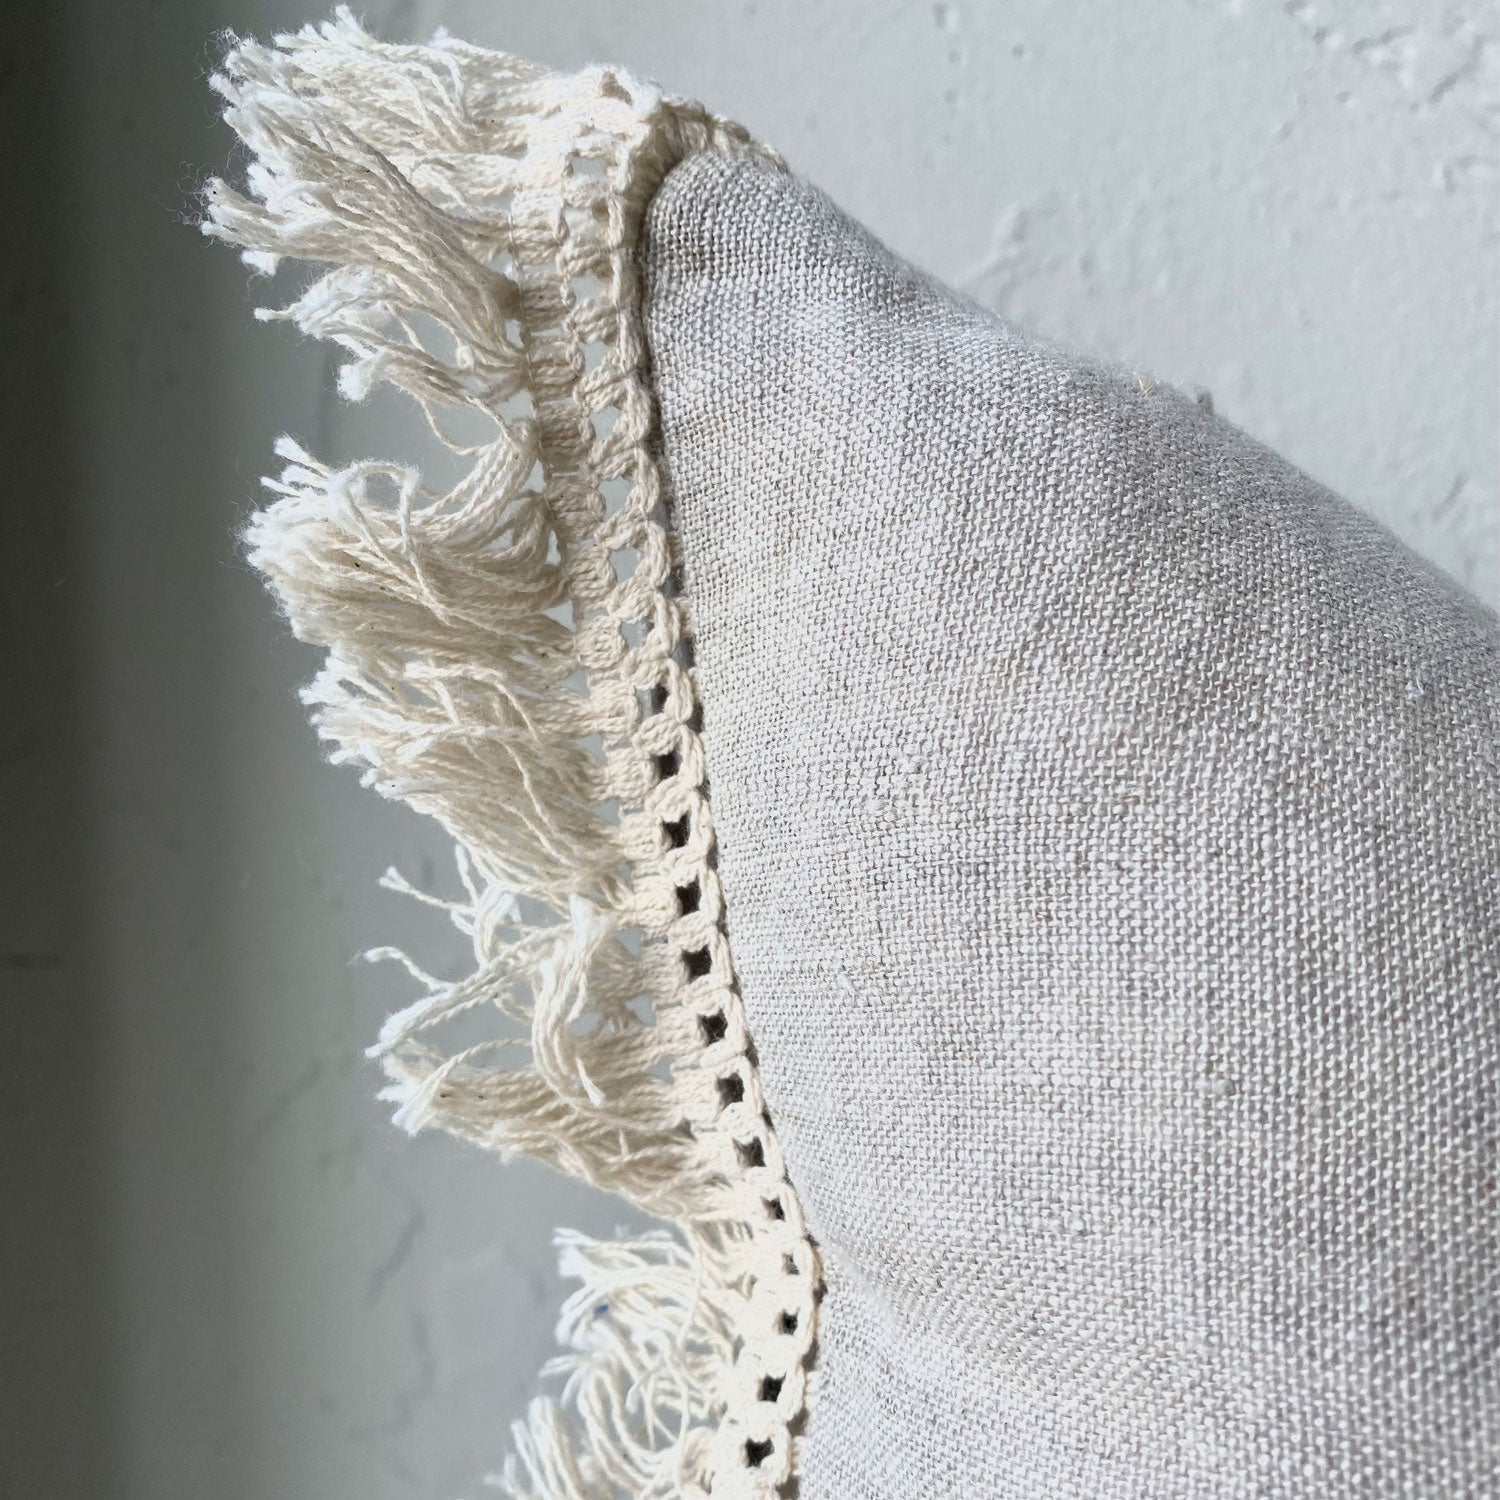 Laced with love multi textured oat colored pillow with lace fringe border up close Galey Alix 